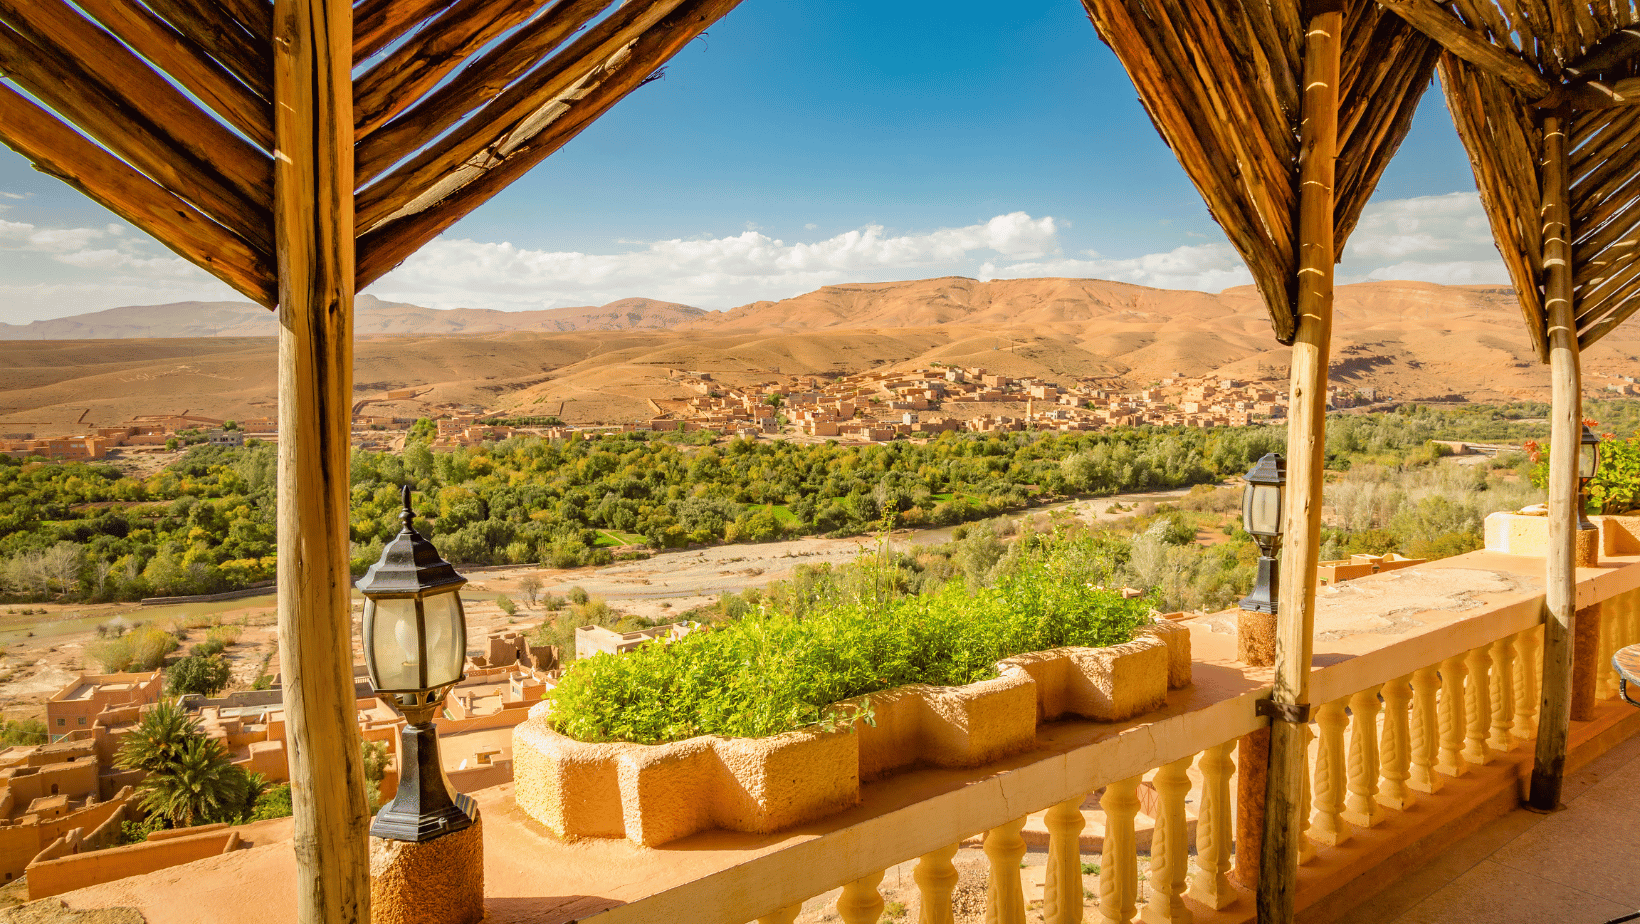 Top Tourist Attractions In Morocco